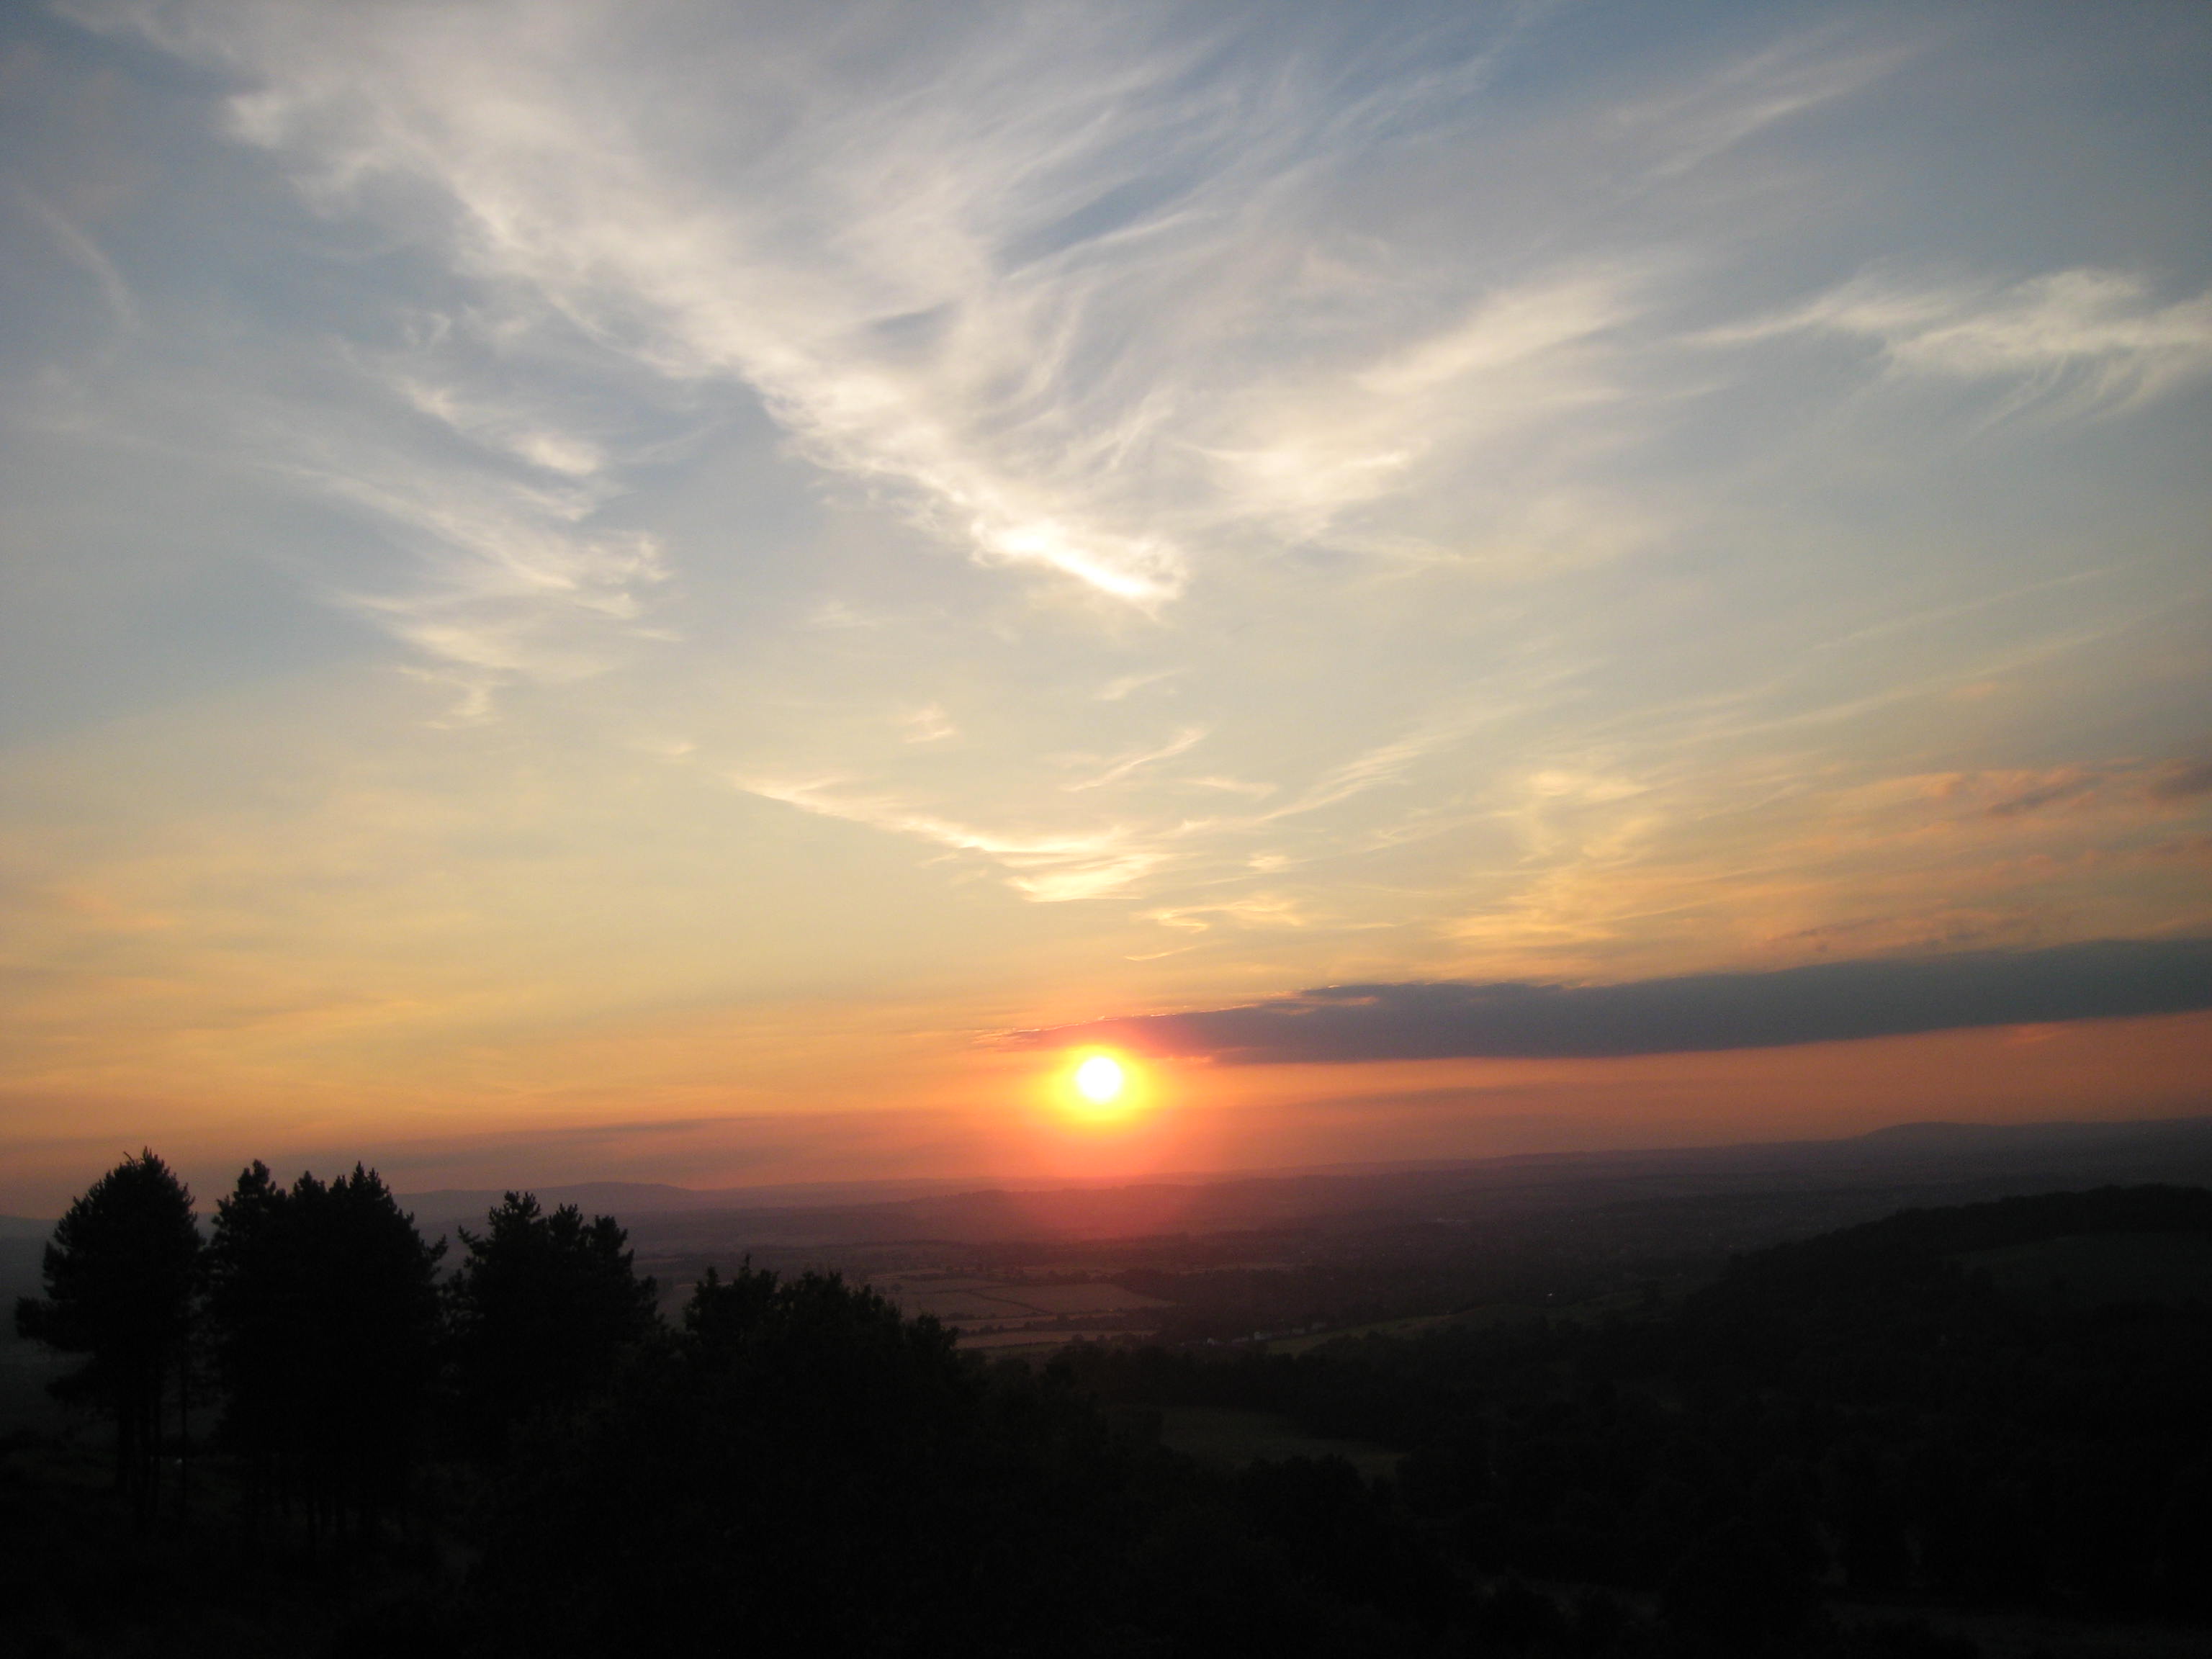 The evening sun at Clent | creativecloudfix